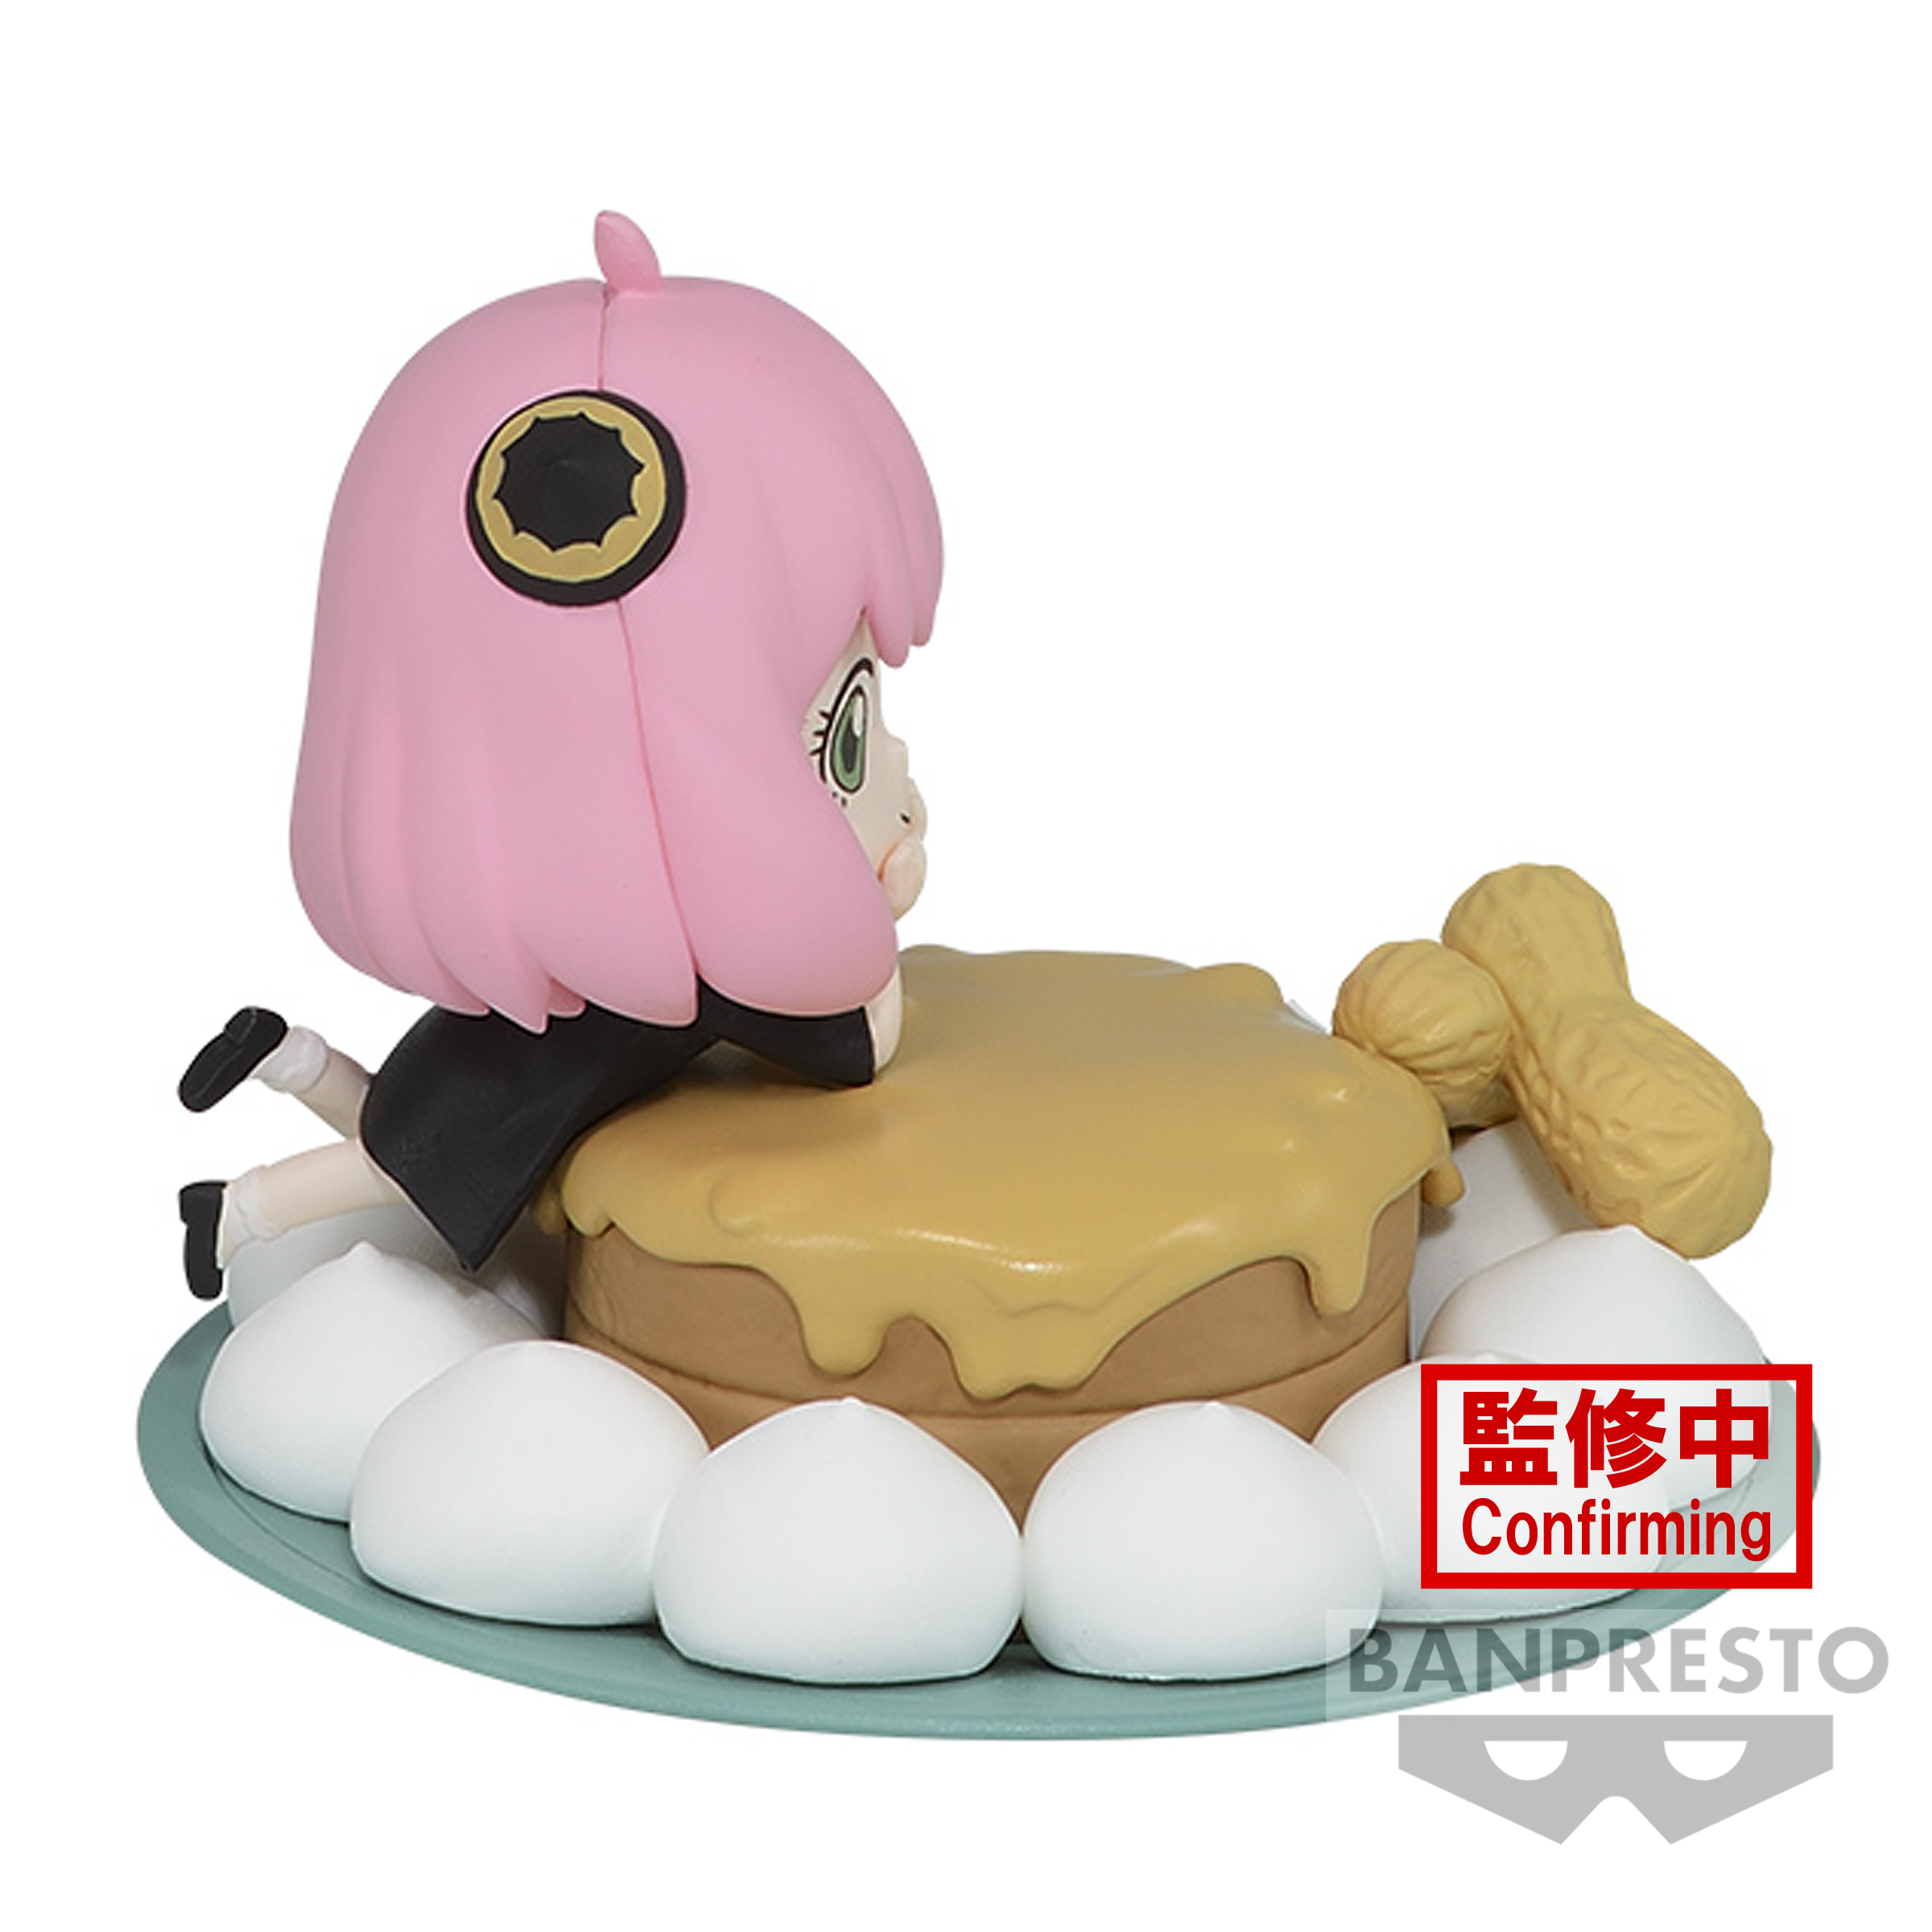 Spy X Family - Anya Forger Paldolce collection vol.1 Prize Figure (Dessert Ver.) image count 1